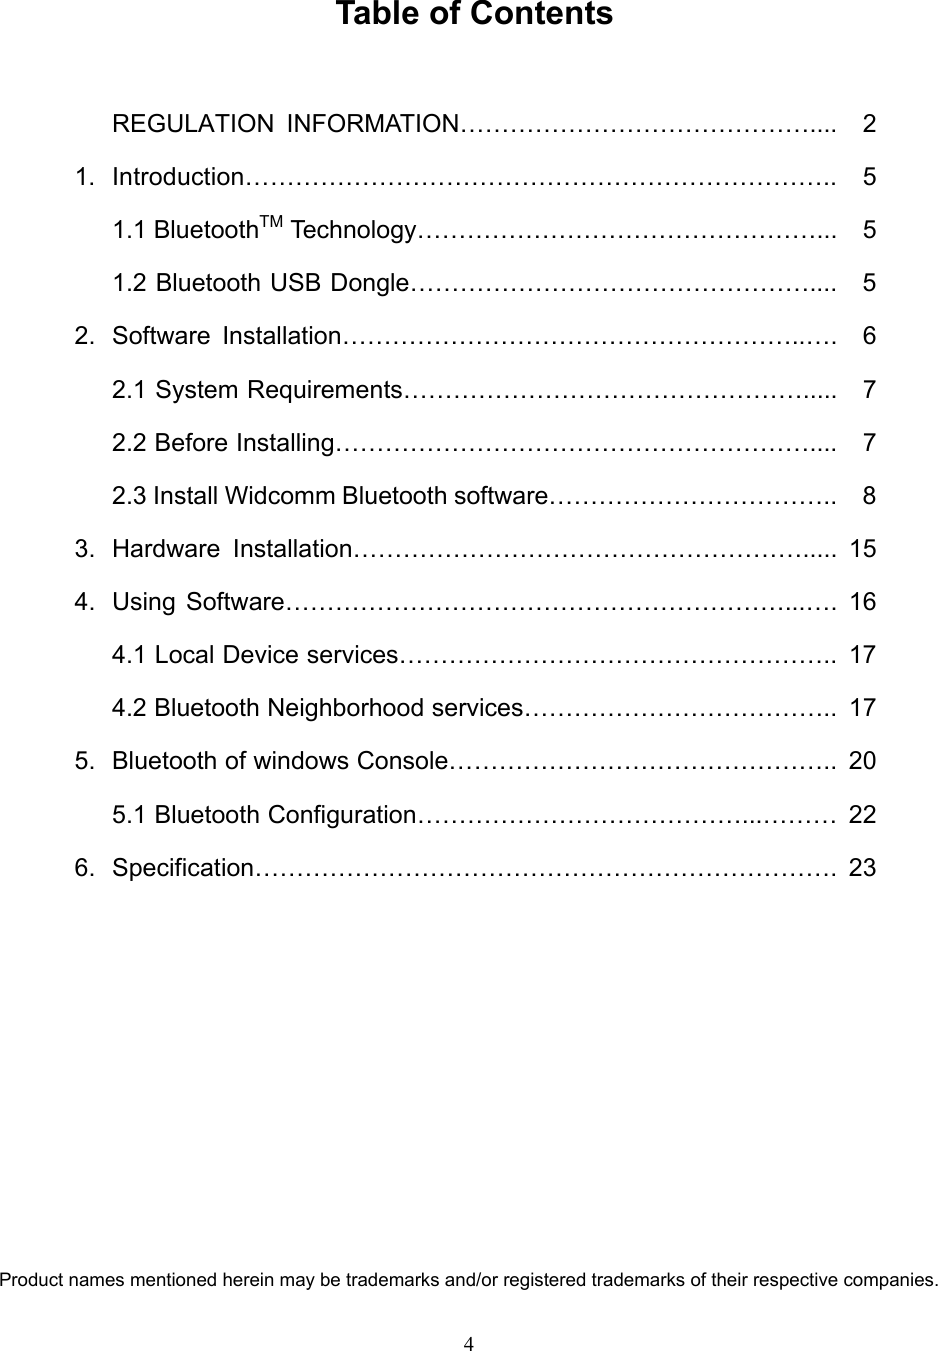  4  Table of Contents  REGULATION INFORMATION……………………………………....  2 1. Introduction…………………………………………………………….. 5  1.1 BluetoothTM Technology…………………………………………...  5   1.2 Bluetooth USB Dongle…………………………………………....  5 2. Software Installation………………………………………………..….  6   2.1 System Requirements………………………………………….....  7  2.2 Before Installing………………………………………………….... 7   2.3 Install Widcomm Bluetooth software……………………………..  8 3. Hardware Installation………………………………………………..... 15 4. Using Software……………………………………………………...…. 16   4.1 Local Device services……………………………………………..  17   4.2 Bluetooth Neighborhood services………………………………..  17 5.  Bluetooth of windows Console………………………………………..  20   5.1 Bluetooth Configuration…………………………………...……… 22 6. Specification……………………………………………………………. 23           Product names mentioned herein may be trademarks and/or registered trademarks of their respective companies. 